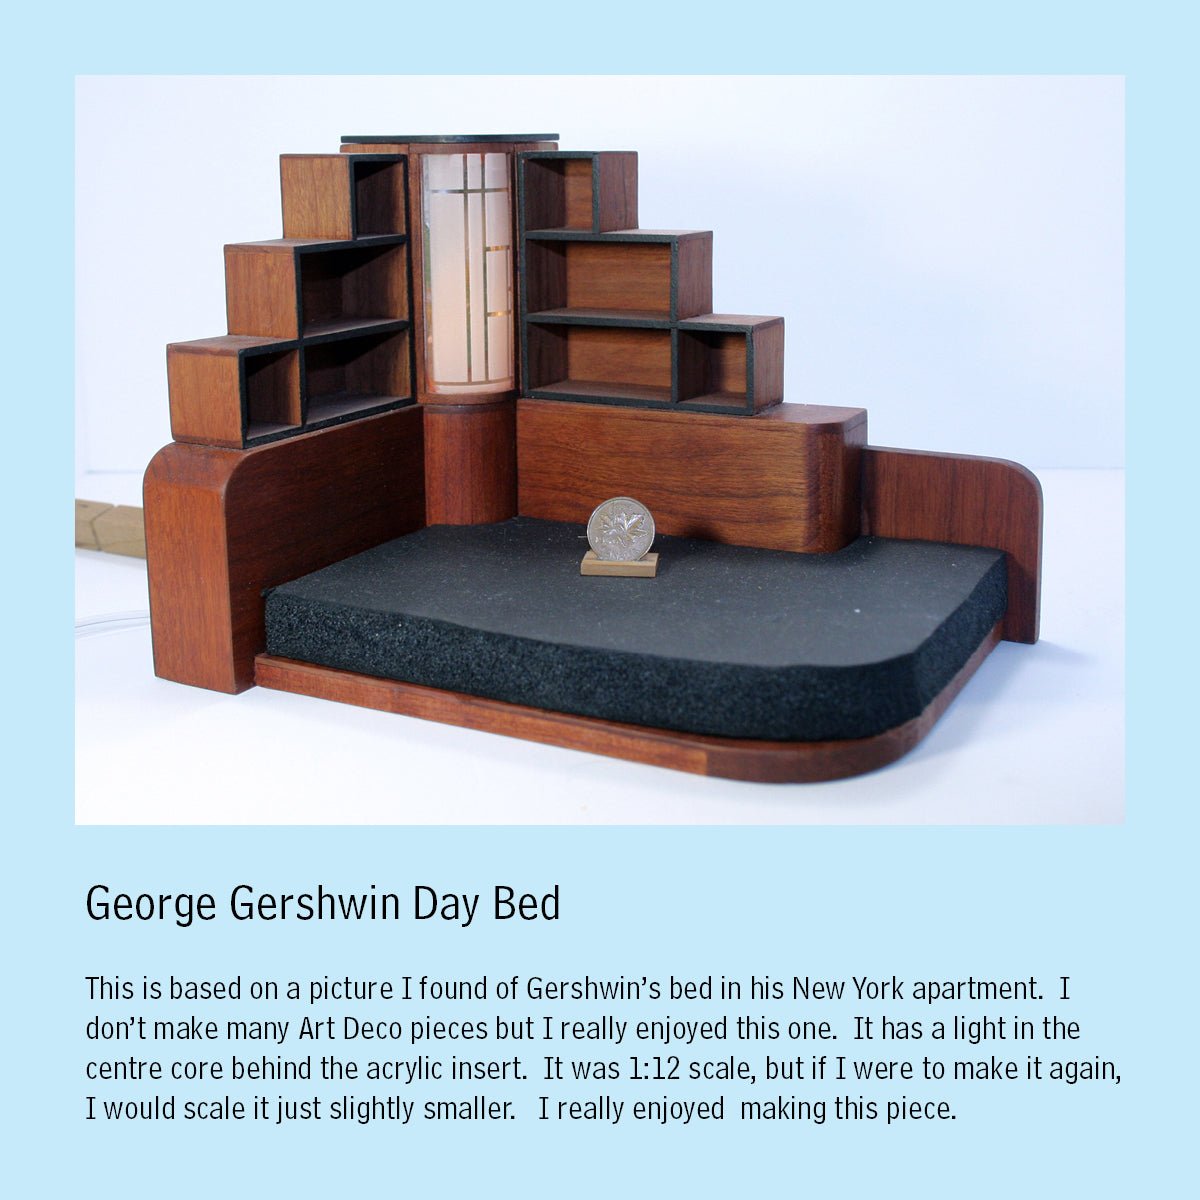 Gershwin Day Bed